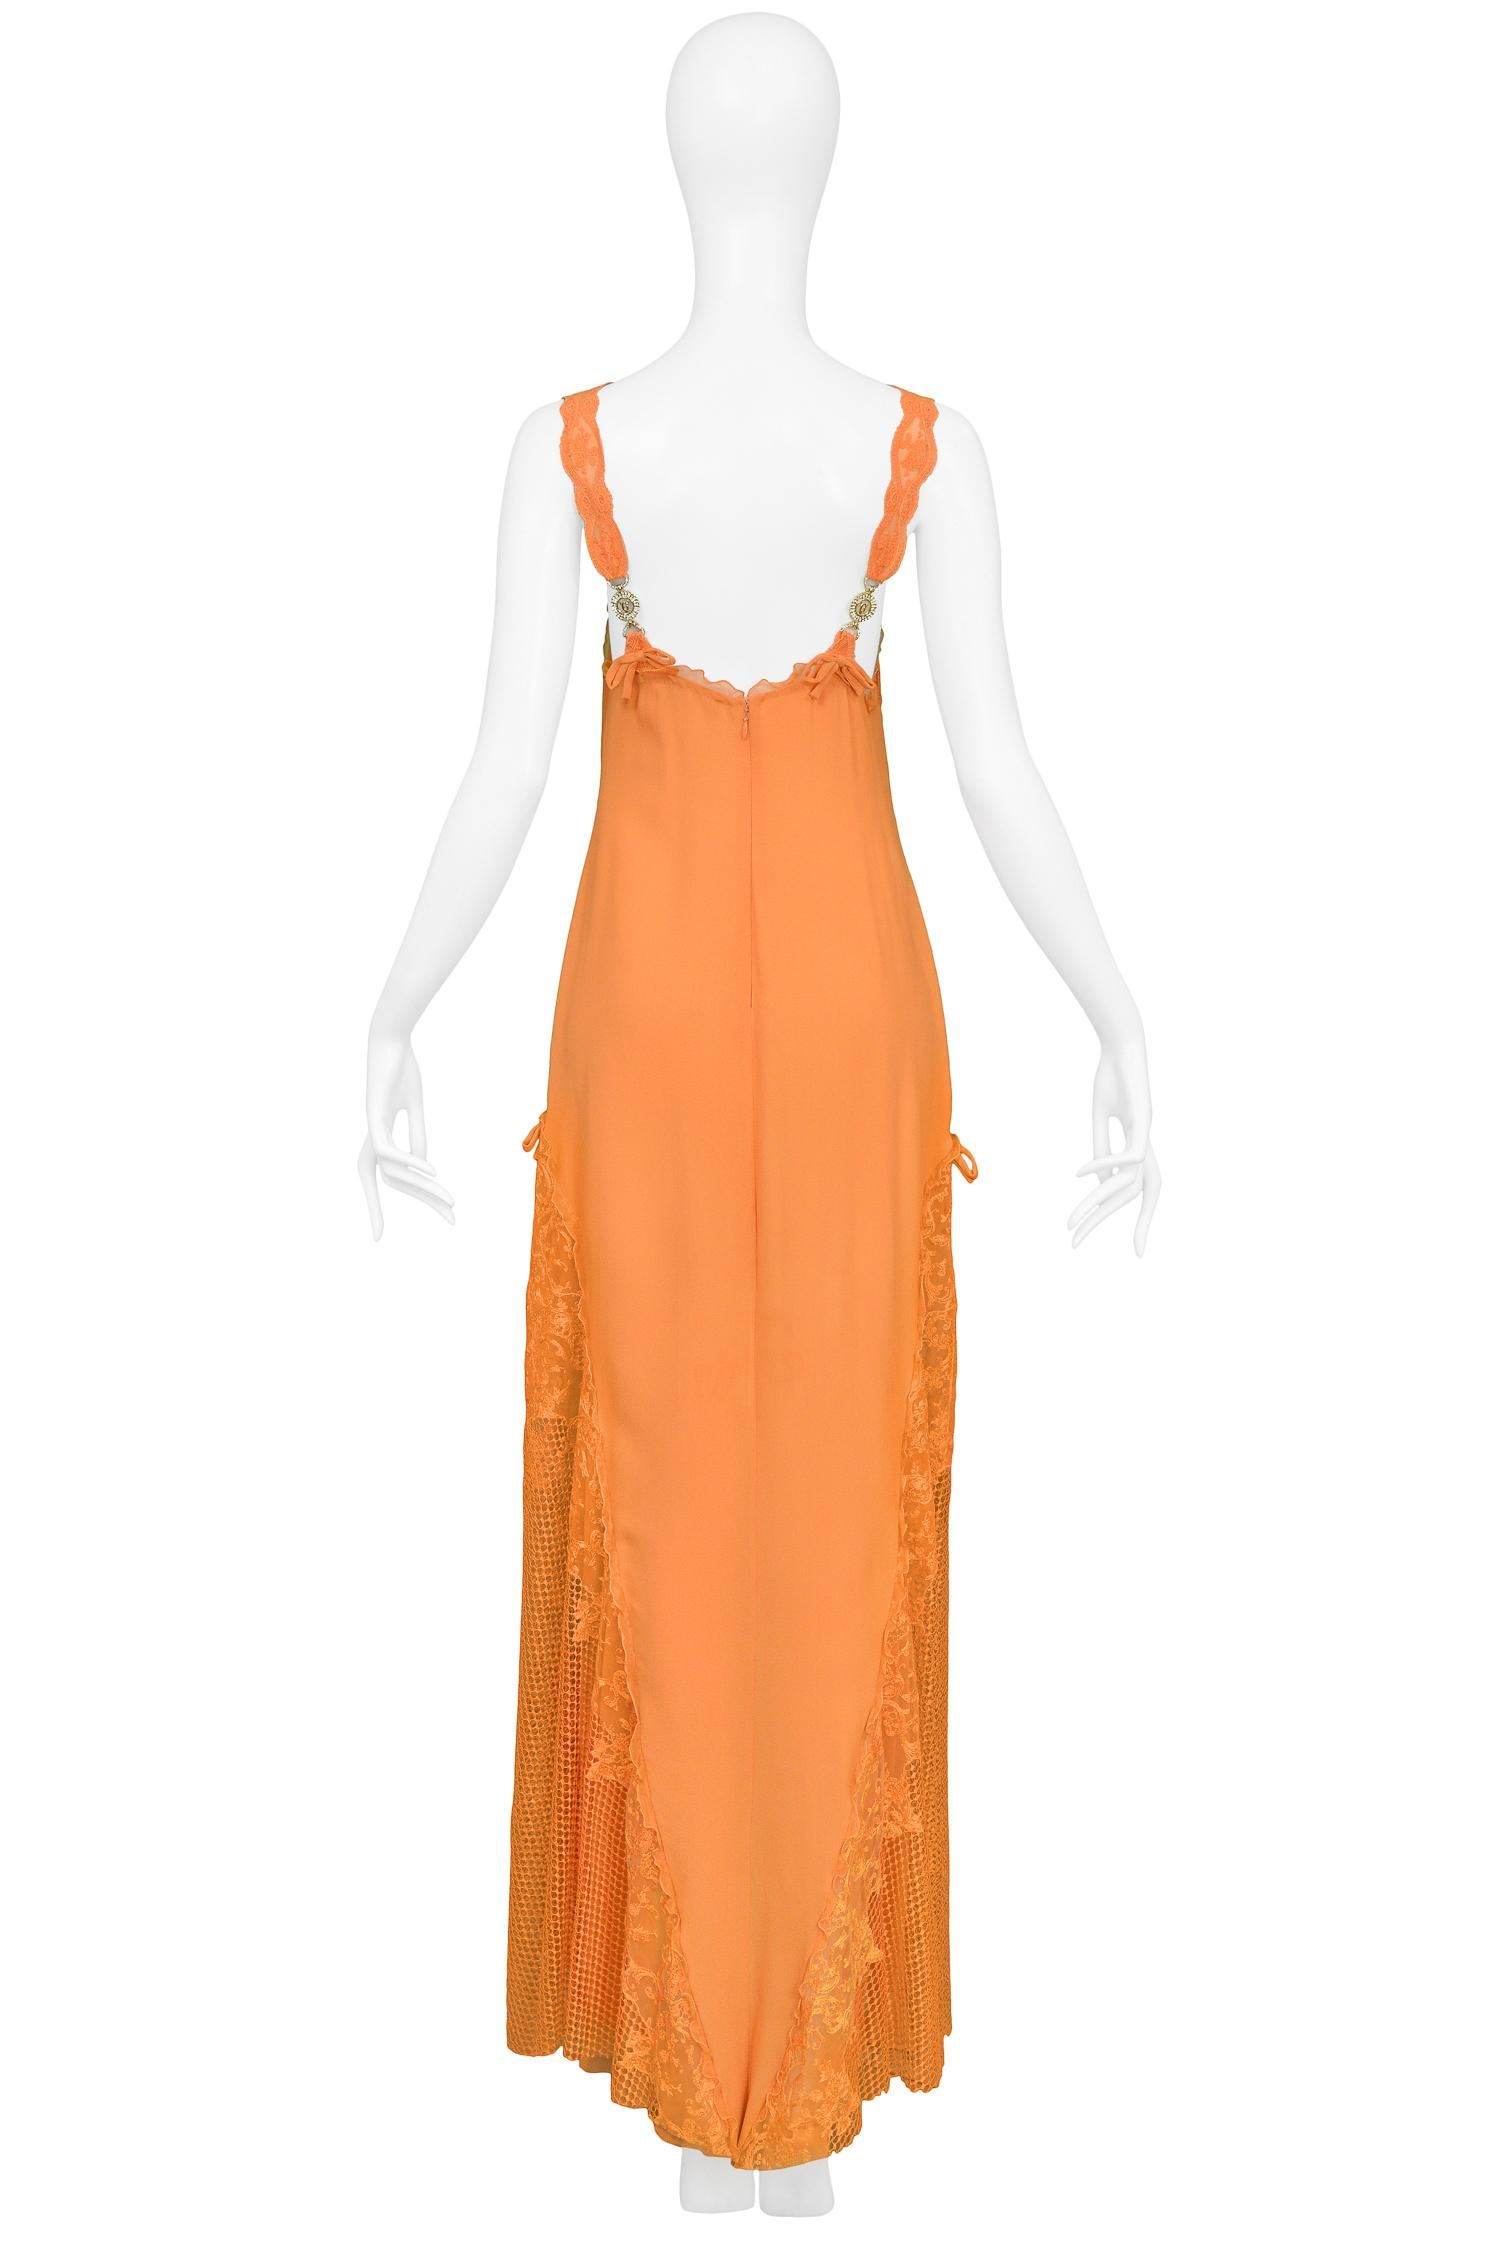 Women's Vintage Gianni Versace Apricot Lace Runway Gown 1997 